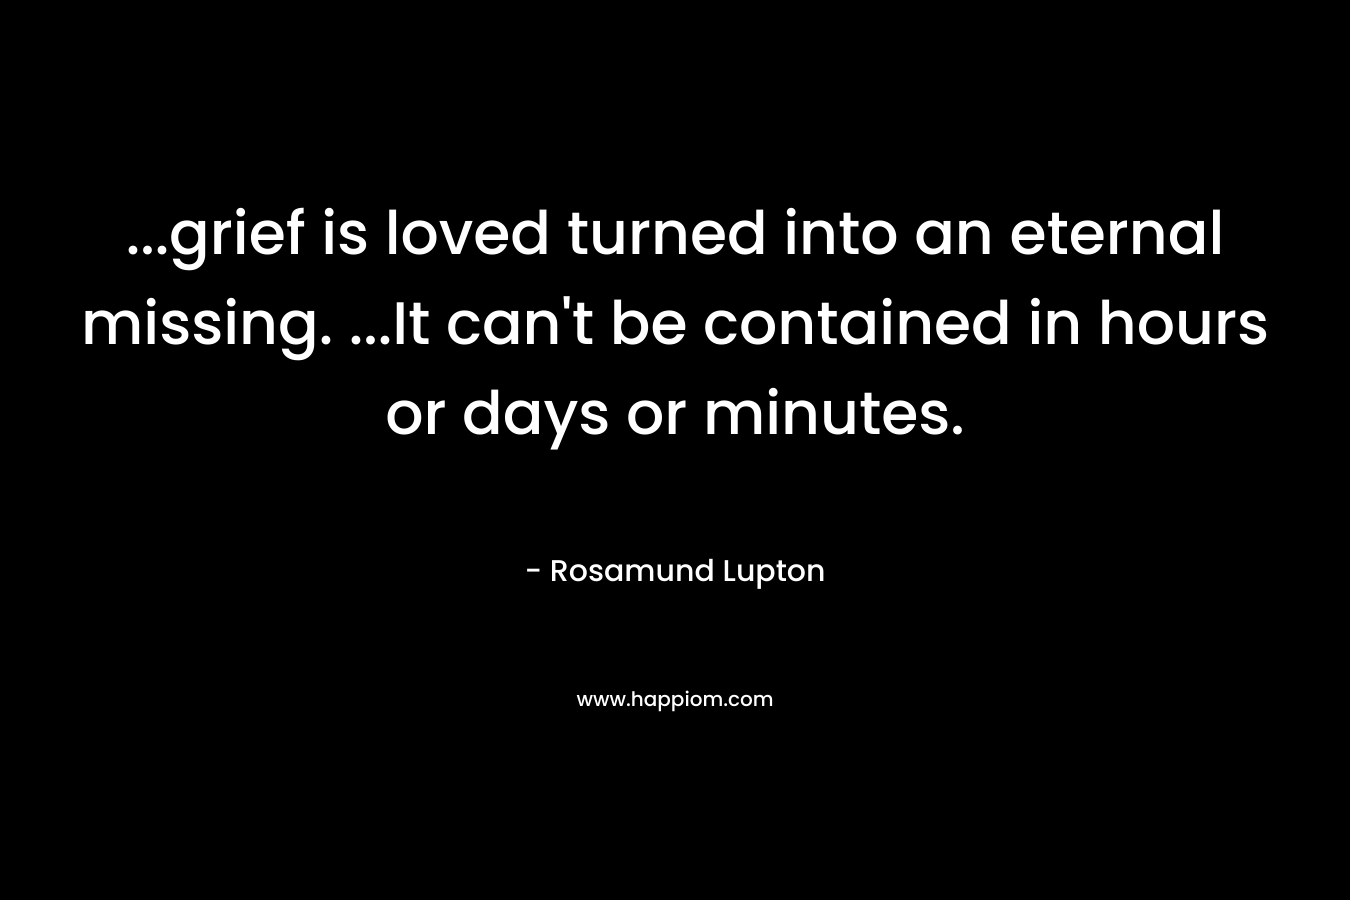 …grief is loved turned into an eternal missing. …It can’t be contained in hours or days or minutes. – Rosamund Lupton